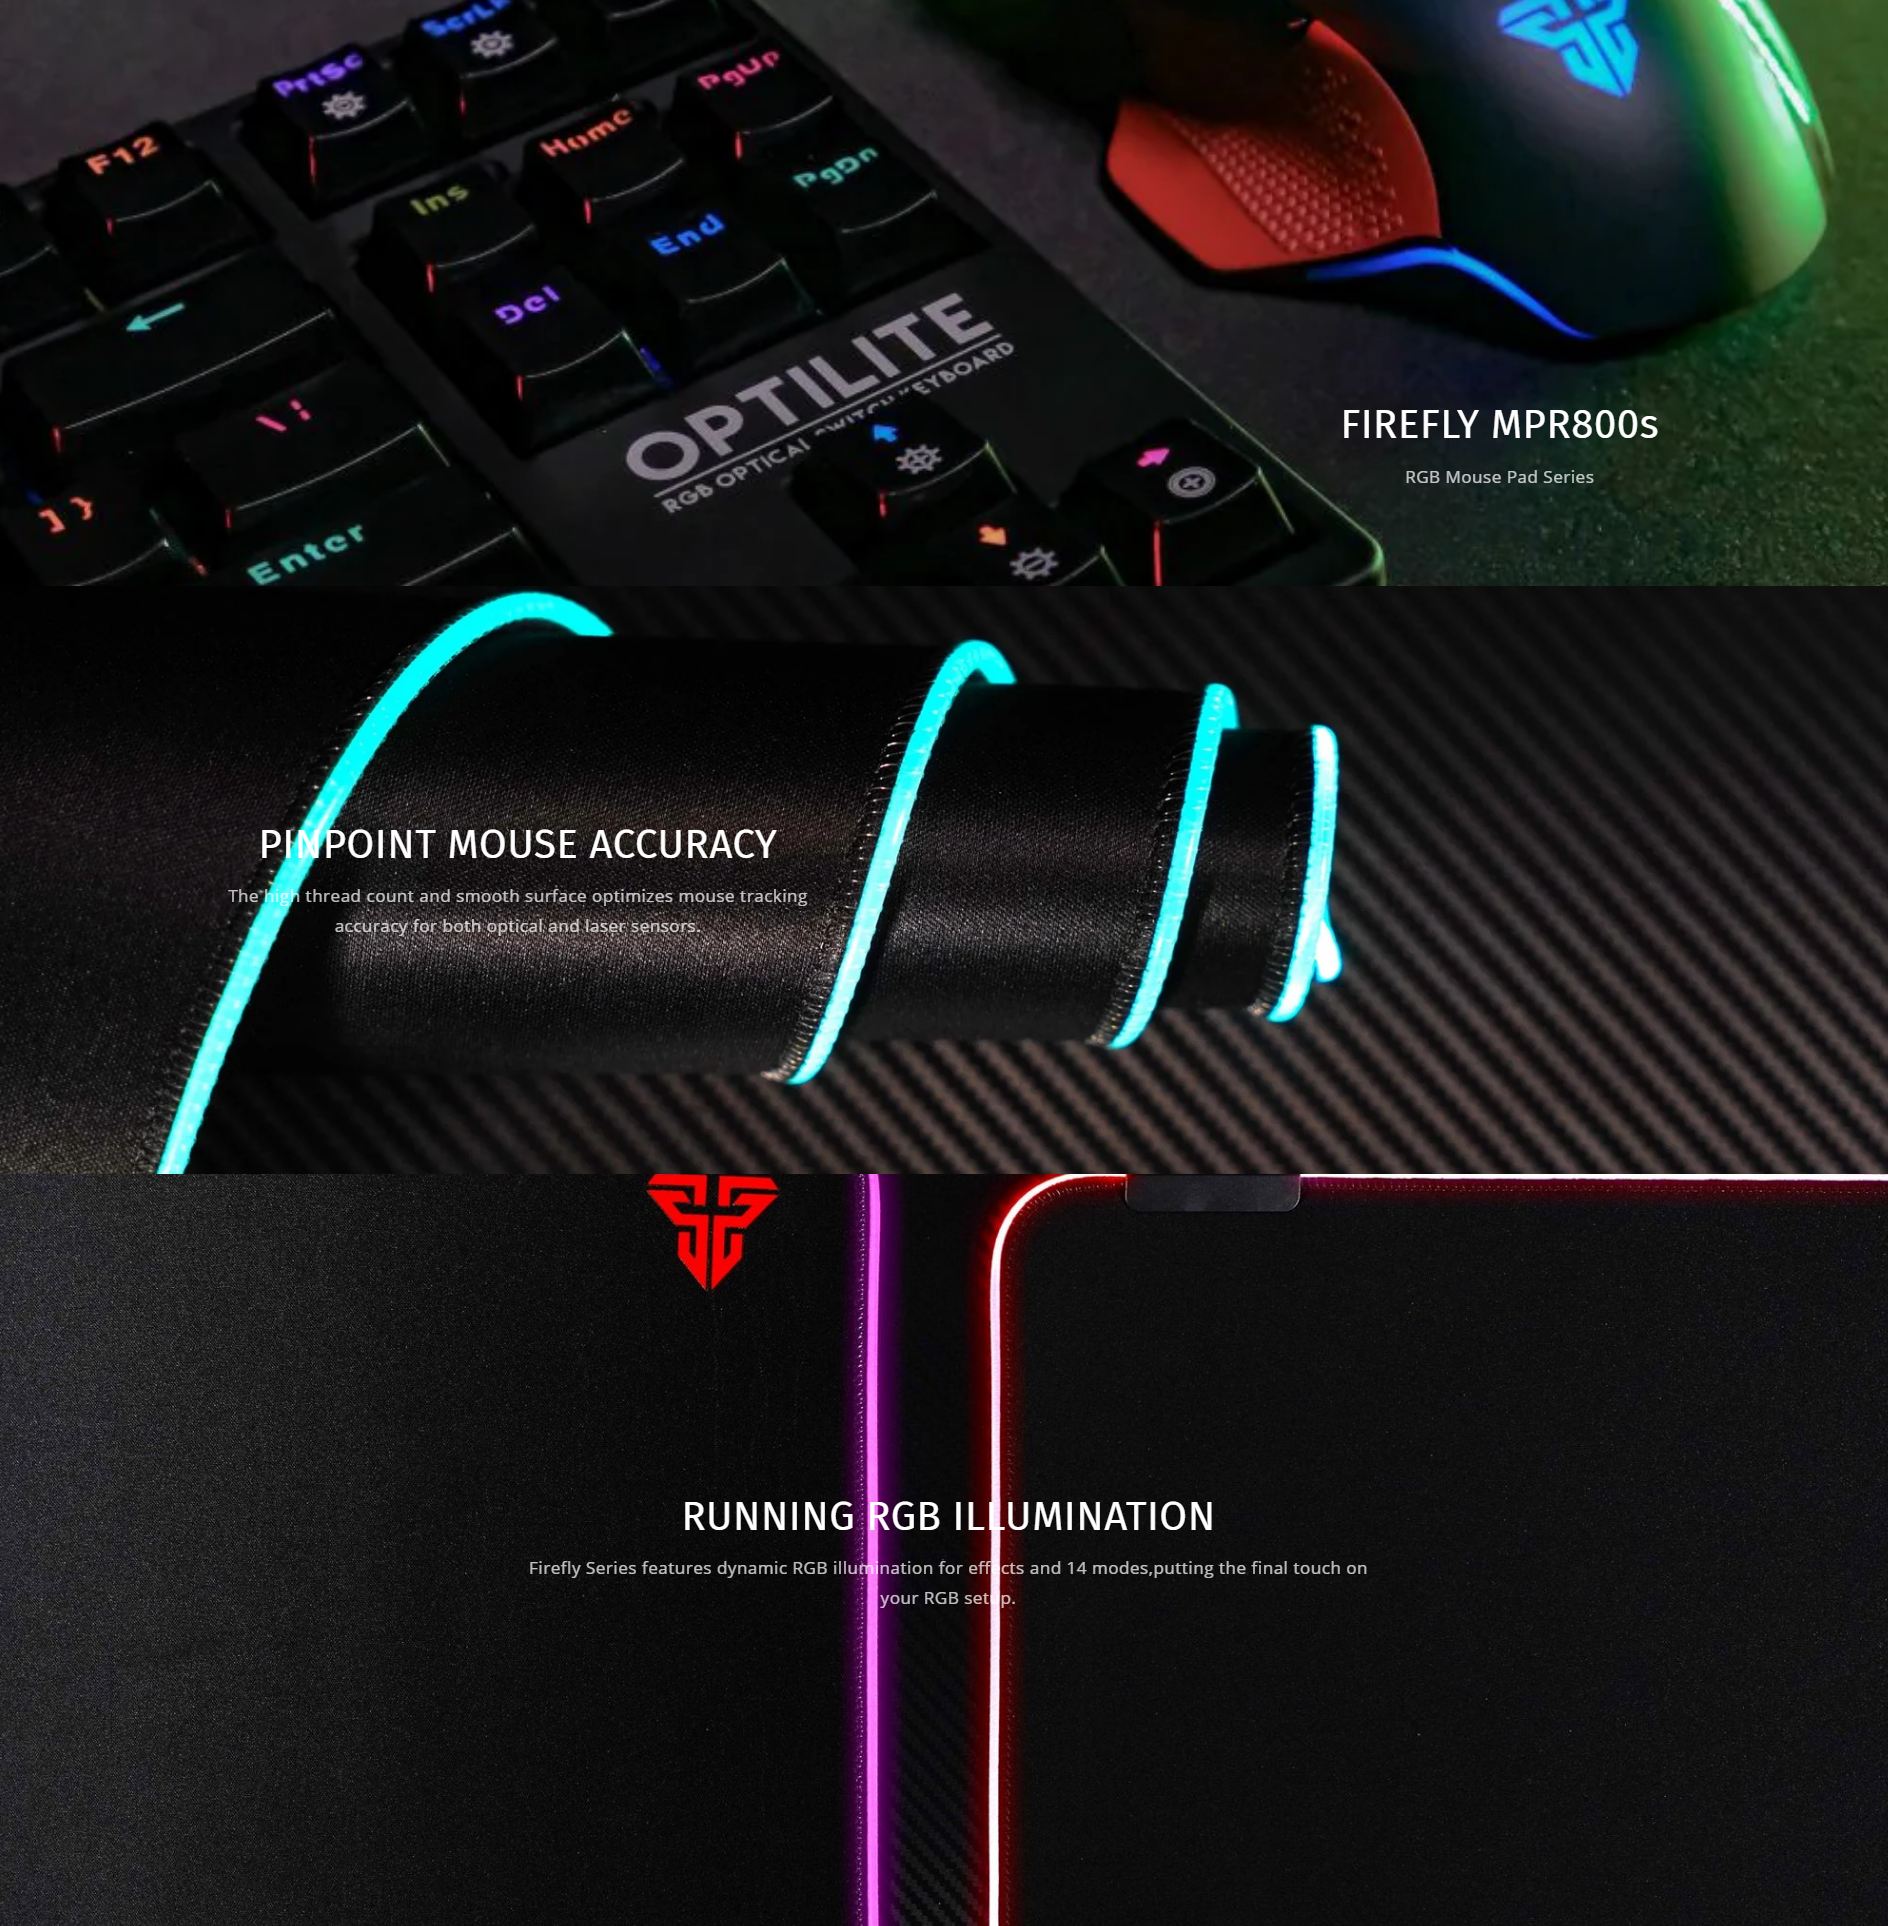 A large marketing image providing additional information about the product Fantech Firefly MPR800s Large Size Deskmat RGB Mousemat - Black - Additional alt info not provided